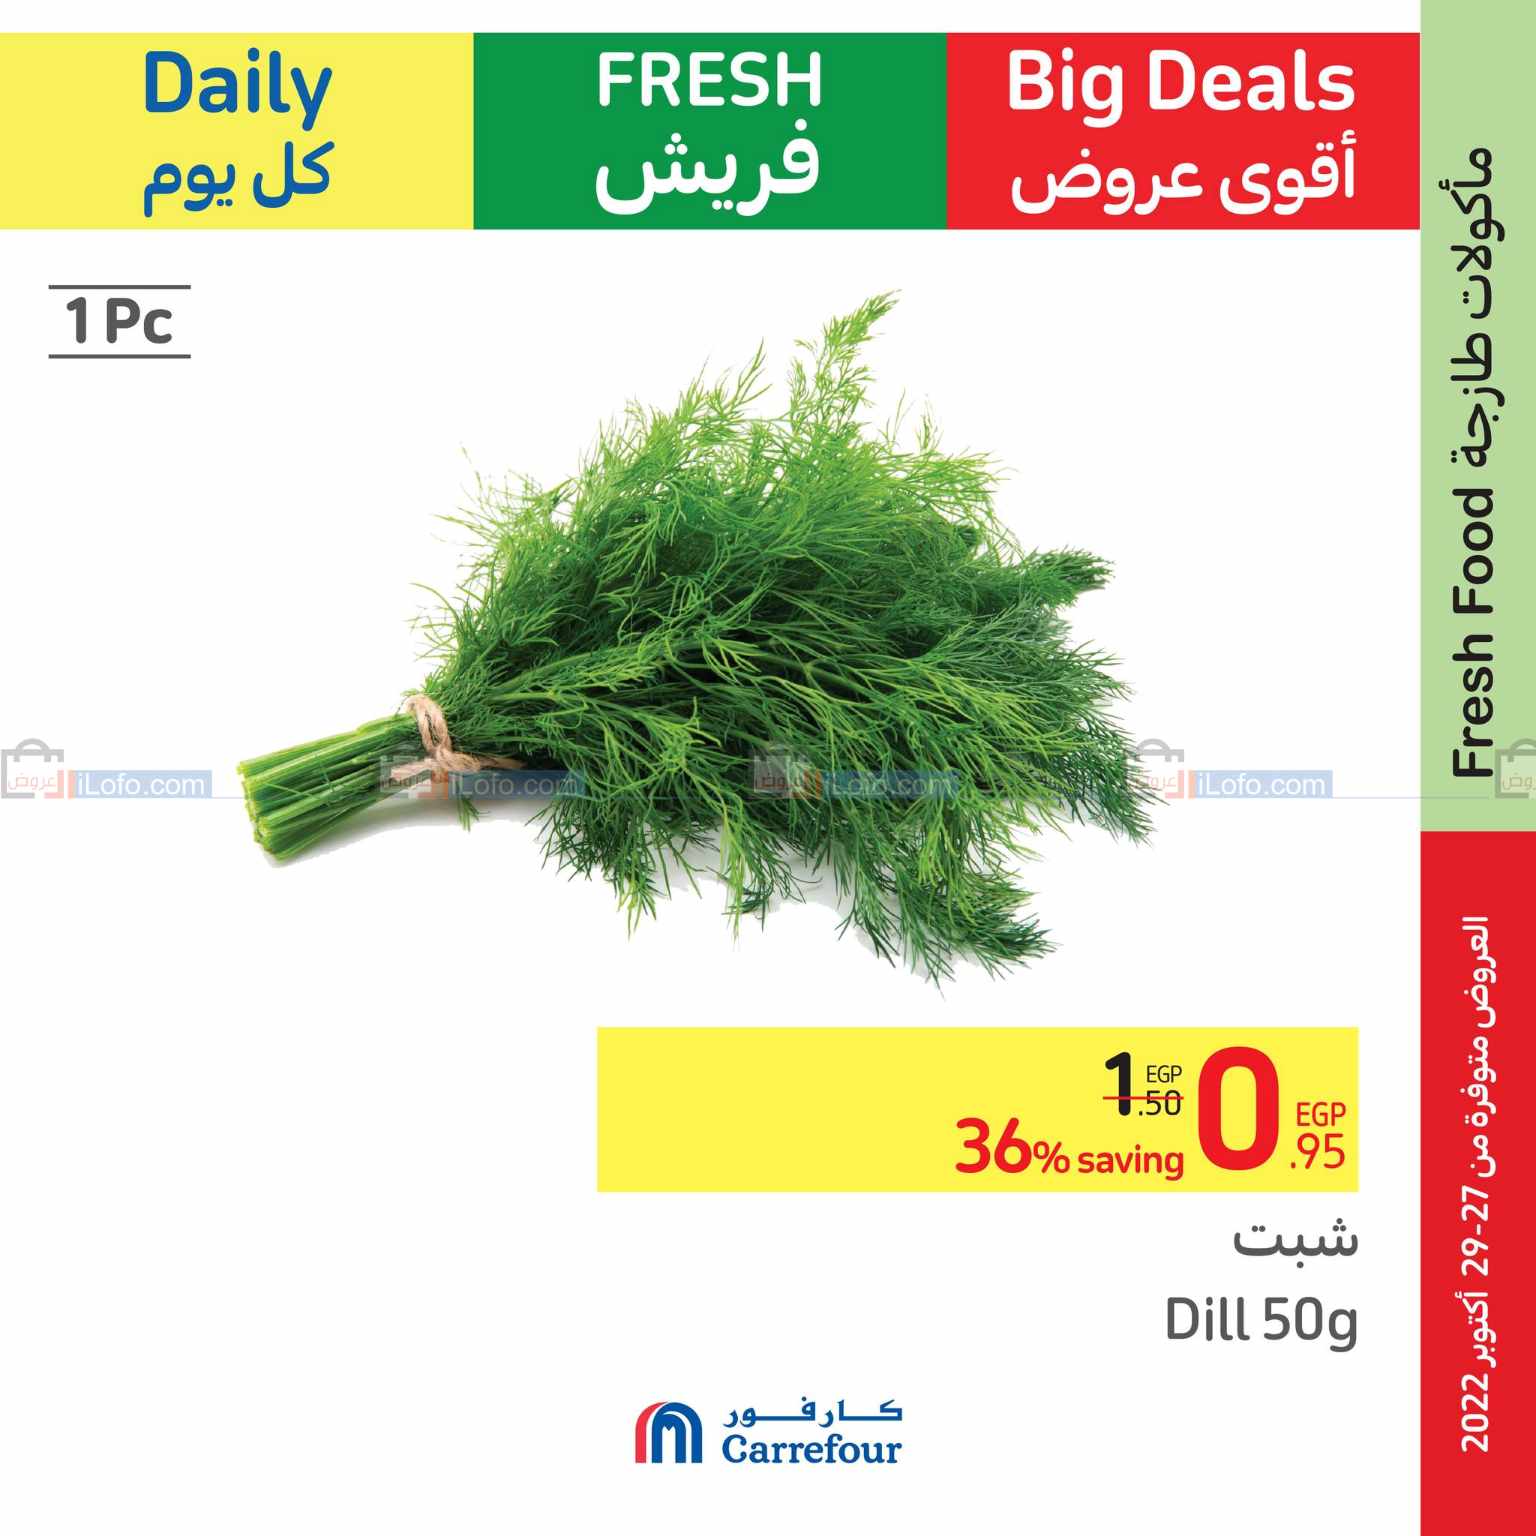 Page 11 at Fresh Deals at Carrefour Egypt 